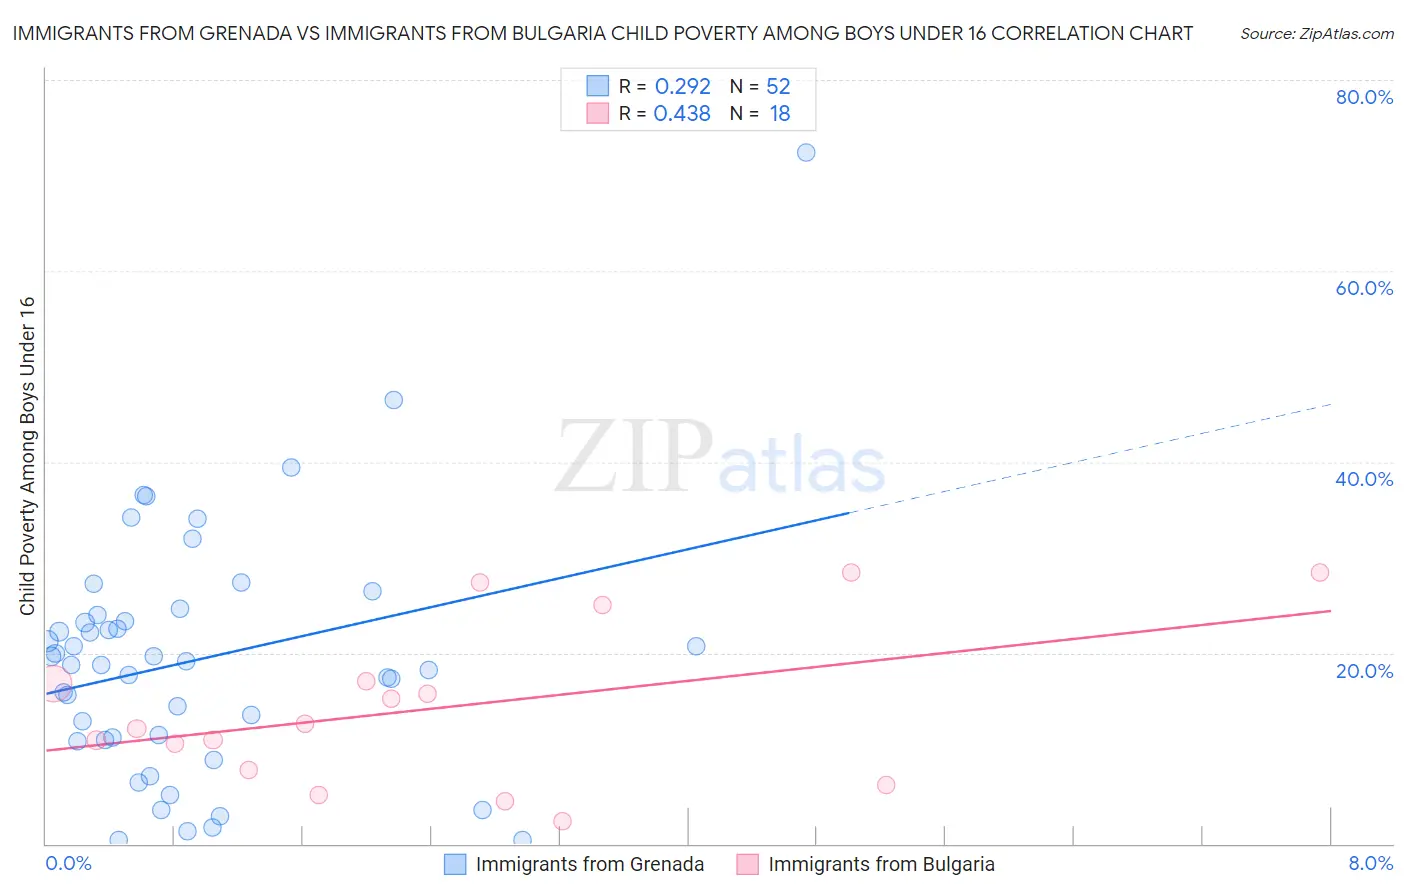 Immigrants from Grenada vs Immigrants from Bulgaria Child Poverty Among Boys Under 16